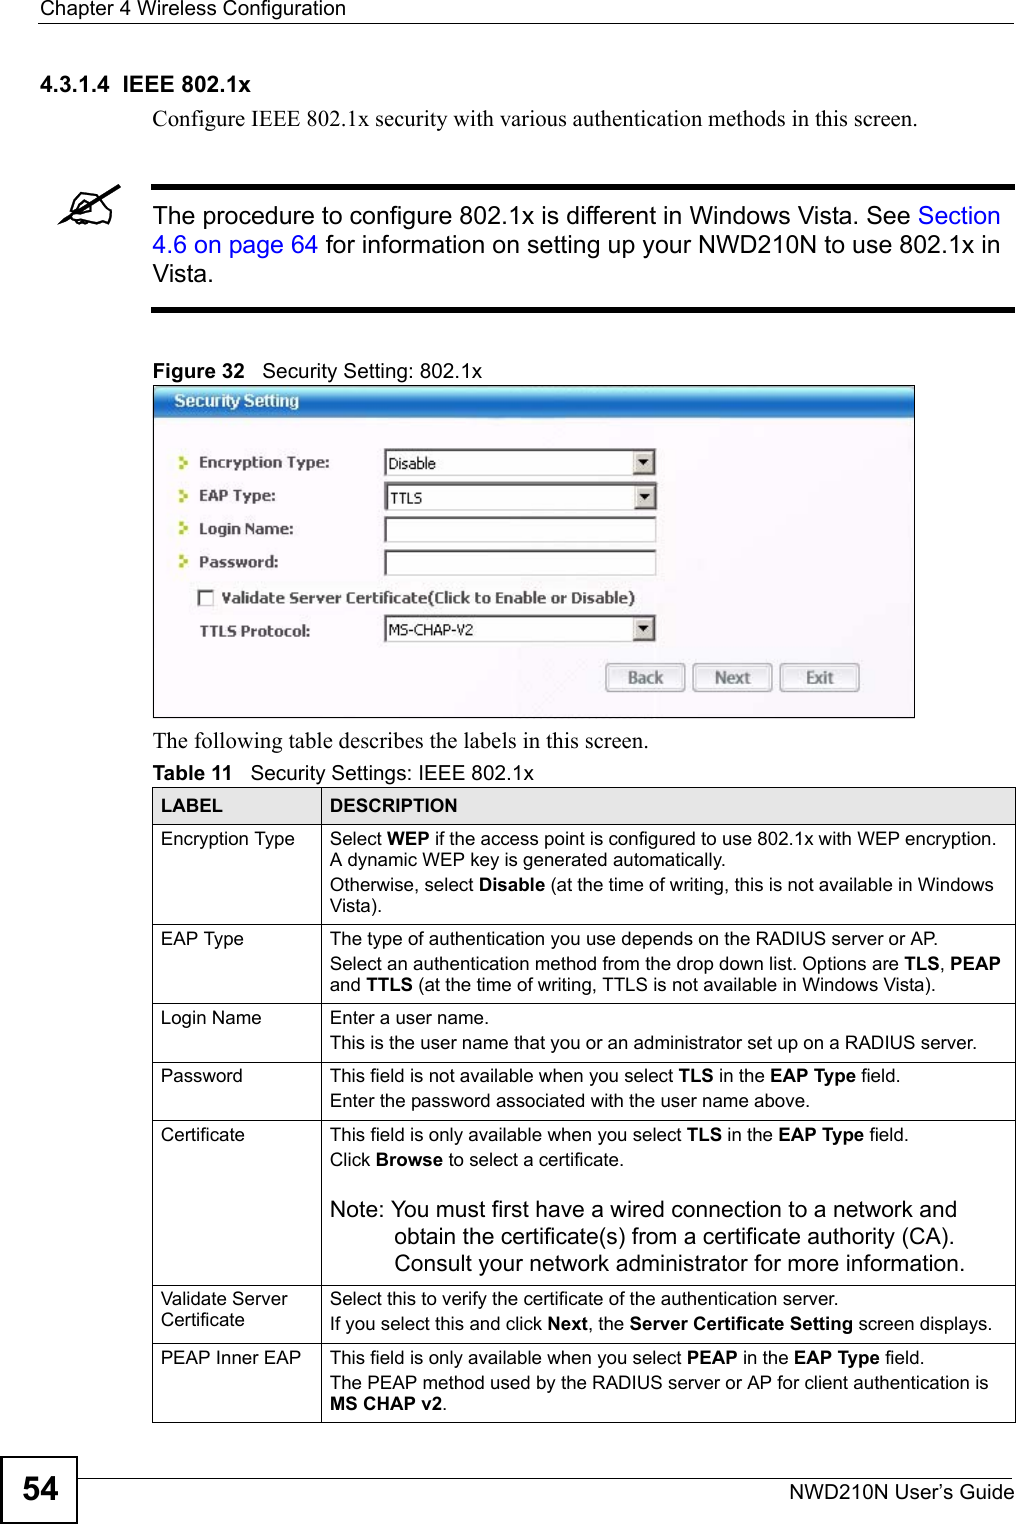 Chapter 4 Wireless ConfigurationNWD210N User’s Guide544.3.1.4  IEEE 802.1xConfigure IEEE 802.1x security with various authentication methods in this screen. &quot;The procedure to configure 802.1x is different in Windows Vista. See Section 4.6 on page 64 for information on setting up your NWD210N to use 802.1x in Vista.Figure 32   Security Setting: 802.1x The following table describes the labels in this screen.  Table 11   Security Settings: IEEE 802.1xLABEL DESCRIPTIONEncryption Type Select WEP if the access point is configured to use 802.1x with WEP encryption. A dynamic WEP key is generated automatically.Otherwise, select Disable (at the time of writing, this is not available in Windows Vista).EAP Type The type of authentication you use depends on the RADIUS server or AP.Select an authentication method from the drop down list. Options are TLS, PEAP and TTLS (at the time of writing, TTLS is not available in Windows Vista).Login Name Enter a user name. This is the user name that you or an administrator set up on a RADIUS server.Password This field is not available when you select TLS in the EAP Type field. Enter the password associated with the user name above. Certificate This field is only available when you select TLS in the EAP Type field. Click Browse to select a certificate.Note: You must first have a wired connection to a network and obtain the certificate(s) from a certificate authority (CA). Consult your network administrator for more information.Validate Server CertificateSelect this to verify the certificate of the authentication server. If you select this and click Next, the Server Certificate Setting screen displays. PEAP Inner EAP This field is only available when you select PEAP in the EAP Type field.The PEAP method used by the RADIUS server or AP for client authentication is MS CHAP v2.